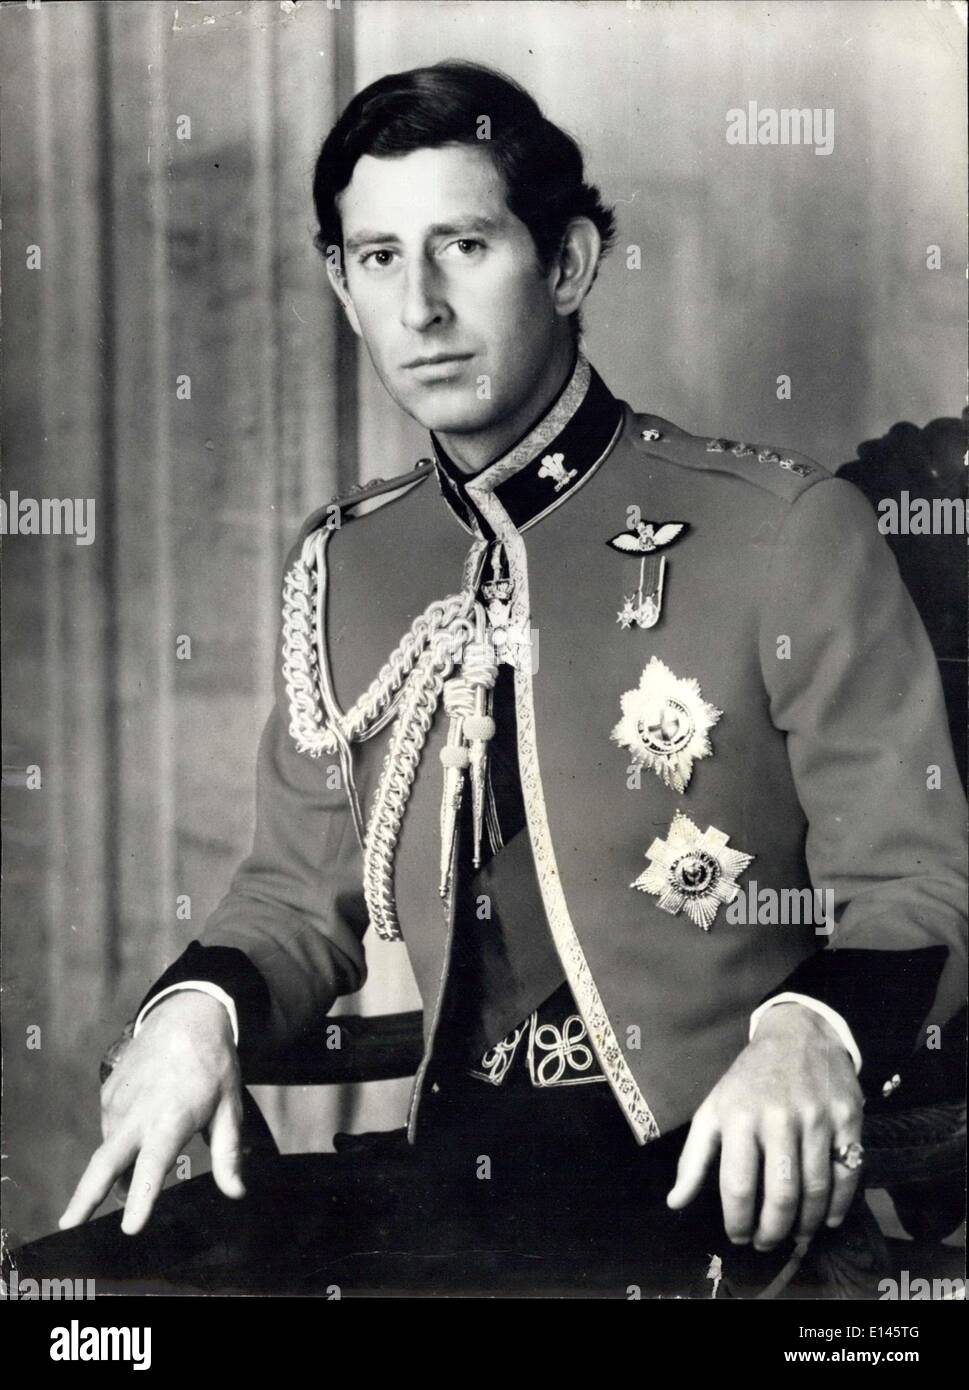 Apr. 05, 2012 - For First Publication Monday 17th October 1977 - HRH The Prince of Wales - Photographed at the Grand Hall, Windsor Castle Wearing the Uniform of the Colonel-in-CHief of the Royal Regiment of Wales, mess dream, His decorations are: from top to bottom, militring nature medal of the Order of the Bath, Minature Cernation Medal, the Star of the Order of the Garter, the Star of the order of the Thistle, and the Blue Garter Sach. The Prince of Wales is Visiting the USA From teh 18th to the 30th of October, and Australia from the 1st to the 11th of November. Stock Photo